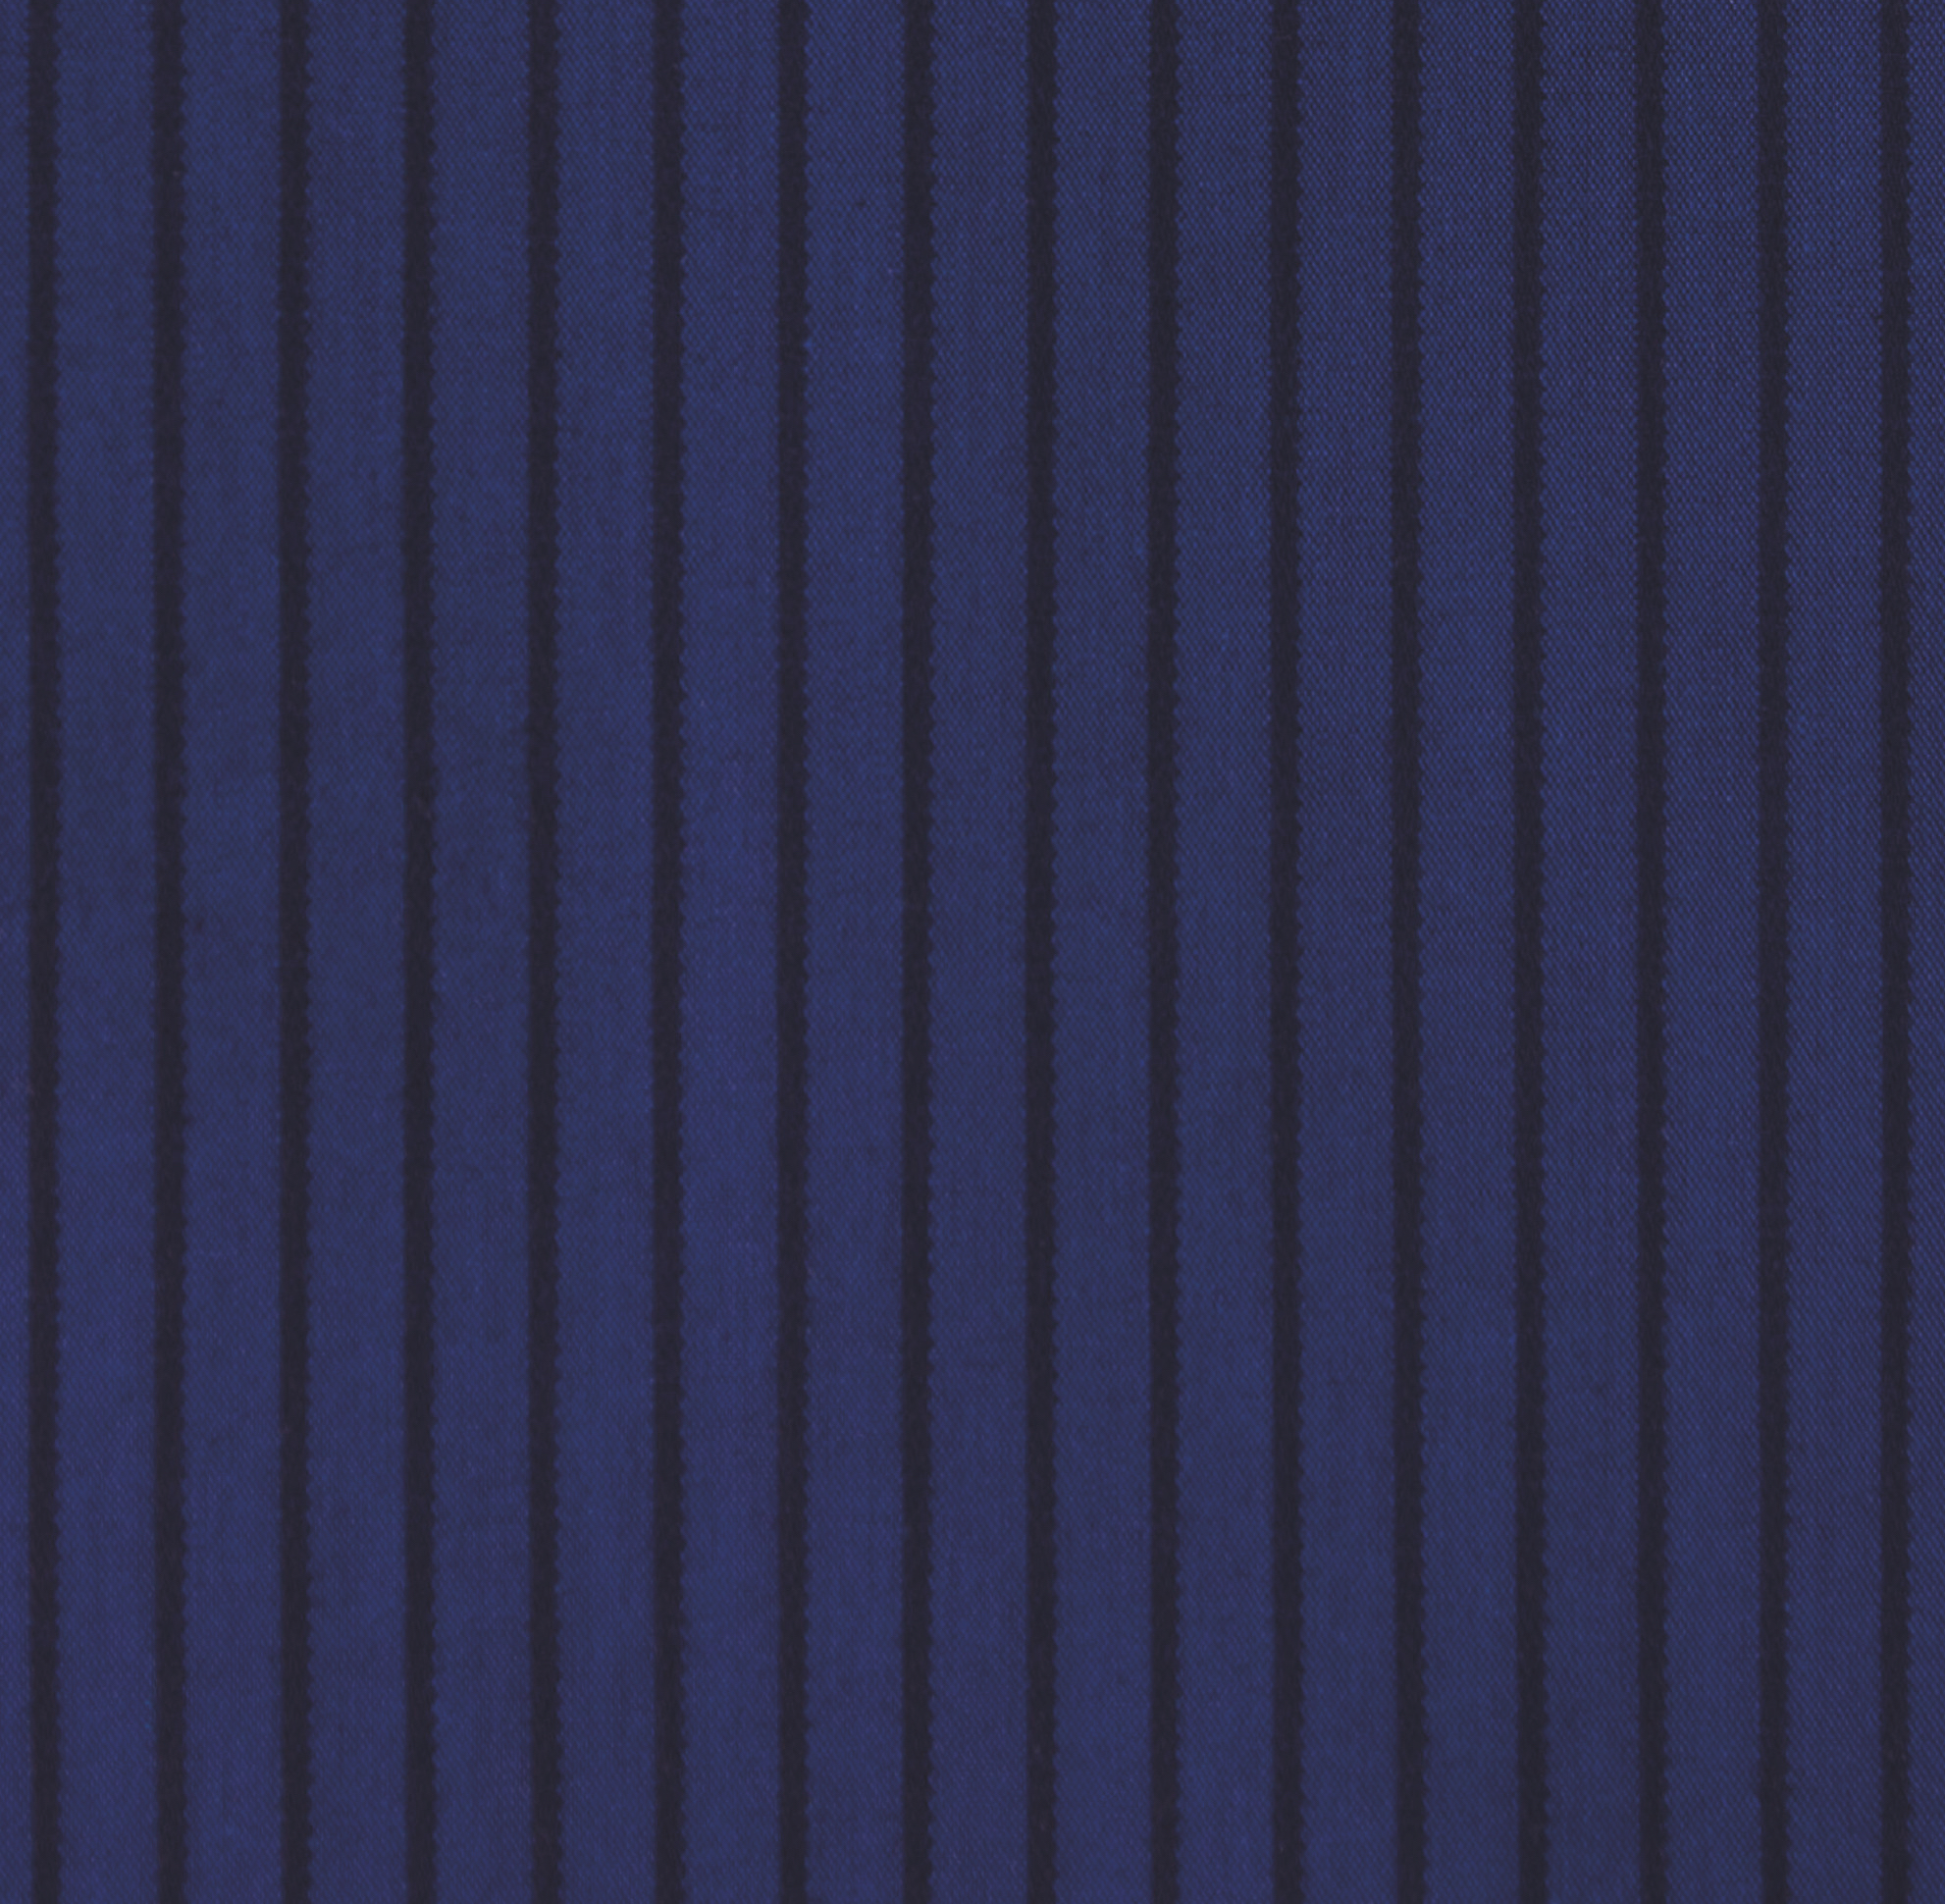 Buy tailor made shirts online - Presidents Range (CLEARANCE) - Navy with Black Stripe